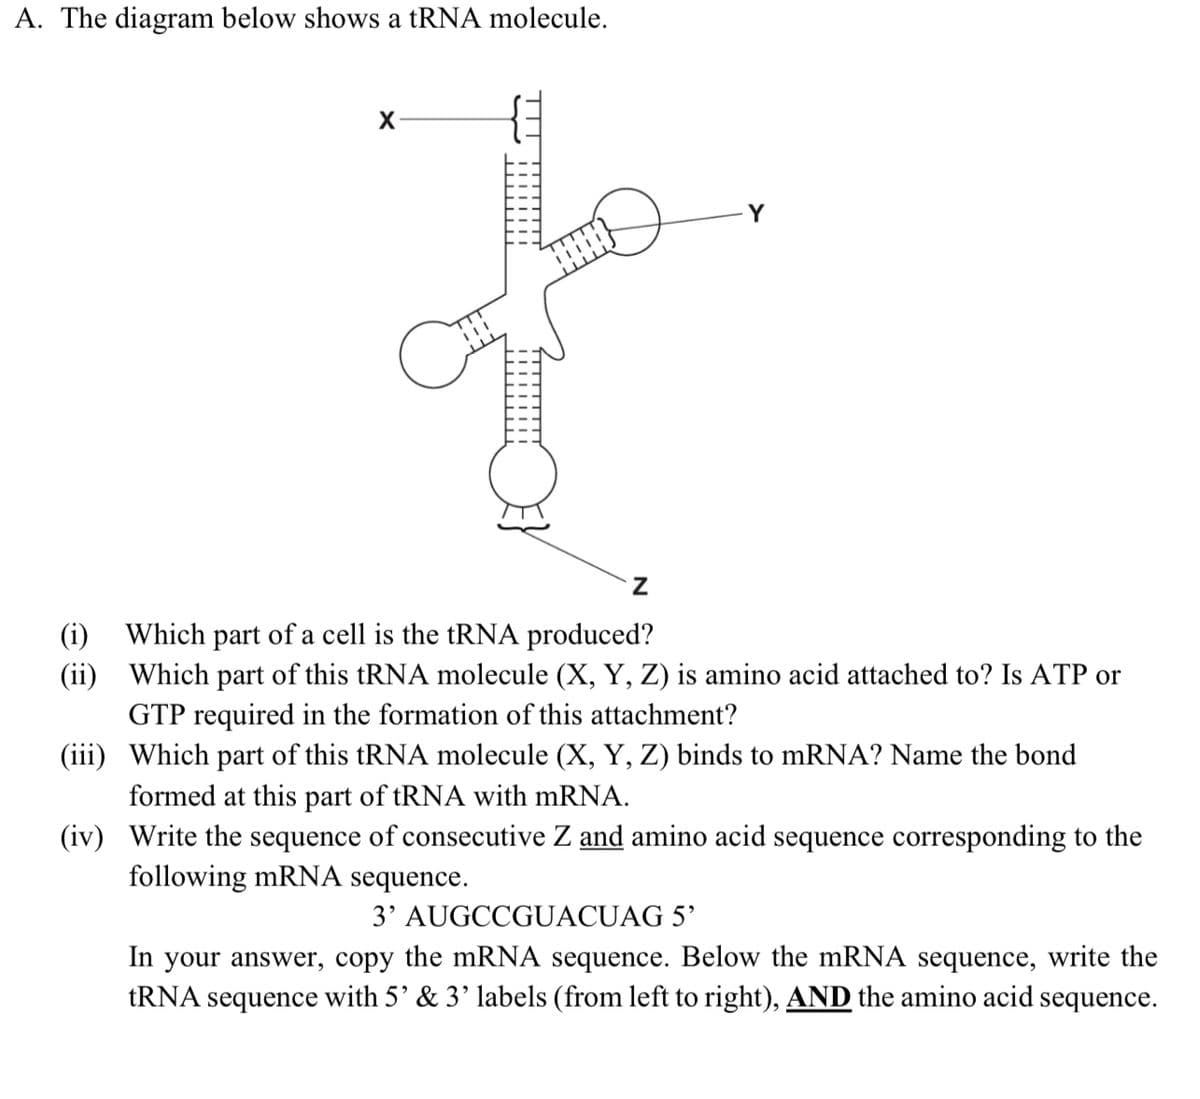 A. The diagram below shows a tRNA molecule.
(i) Which part of a cell is the tRNA produced?
(ii) Which part of this tRNA molecule (X, Y, Z) is amino acid attached to? Is ATP or
GTP required in the formation of this attachment?
(iii) Which part of this tRNA molecule (X, Y, Z) binds to mRNA? Name the bond
formed at this part of tRNA with mRNA.
(iv) Write the sequence of consecutive Z and amino acid sequence corresponding to the
following mRNA sequence.
3' AUGCCGUACUAG 5'
In your answer, copy the mRNA sequence. Below the mRNA sequence, write the
TRNA sequence with 5' & 3' labels (from left to right), AND the amino acid sequence.
